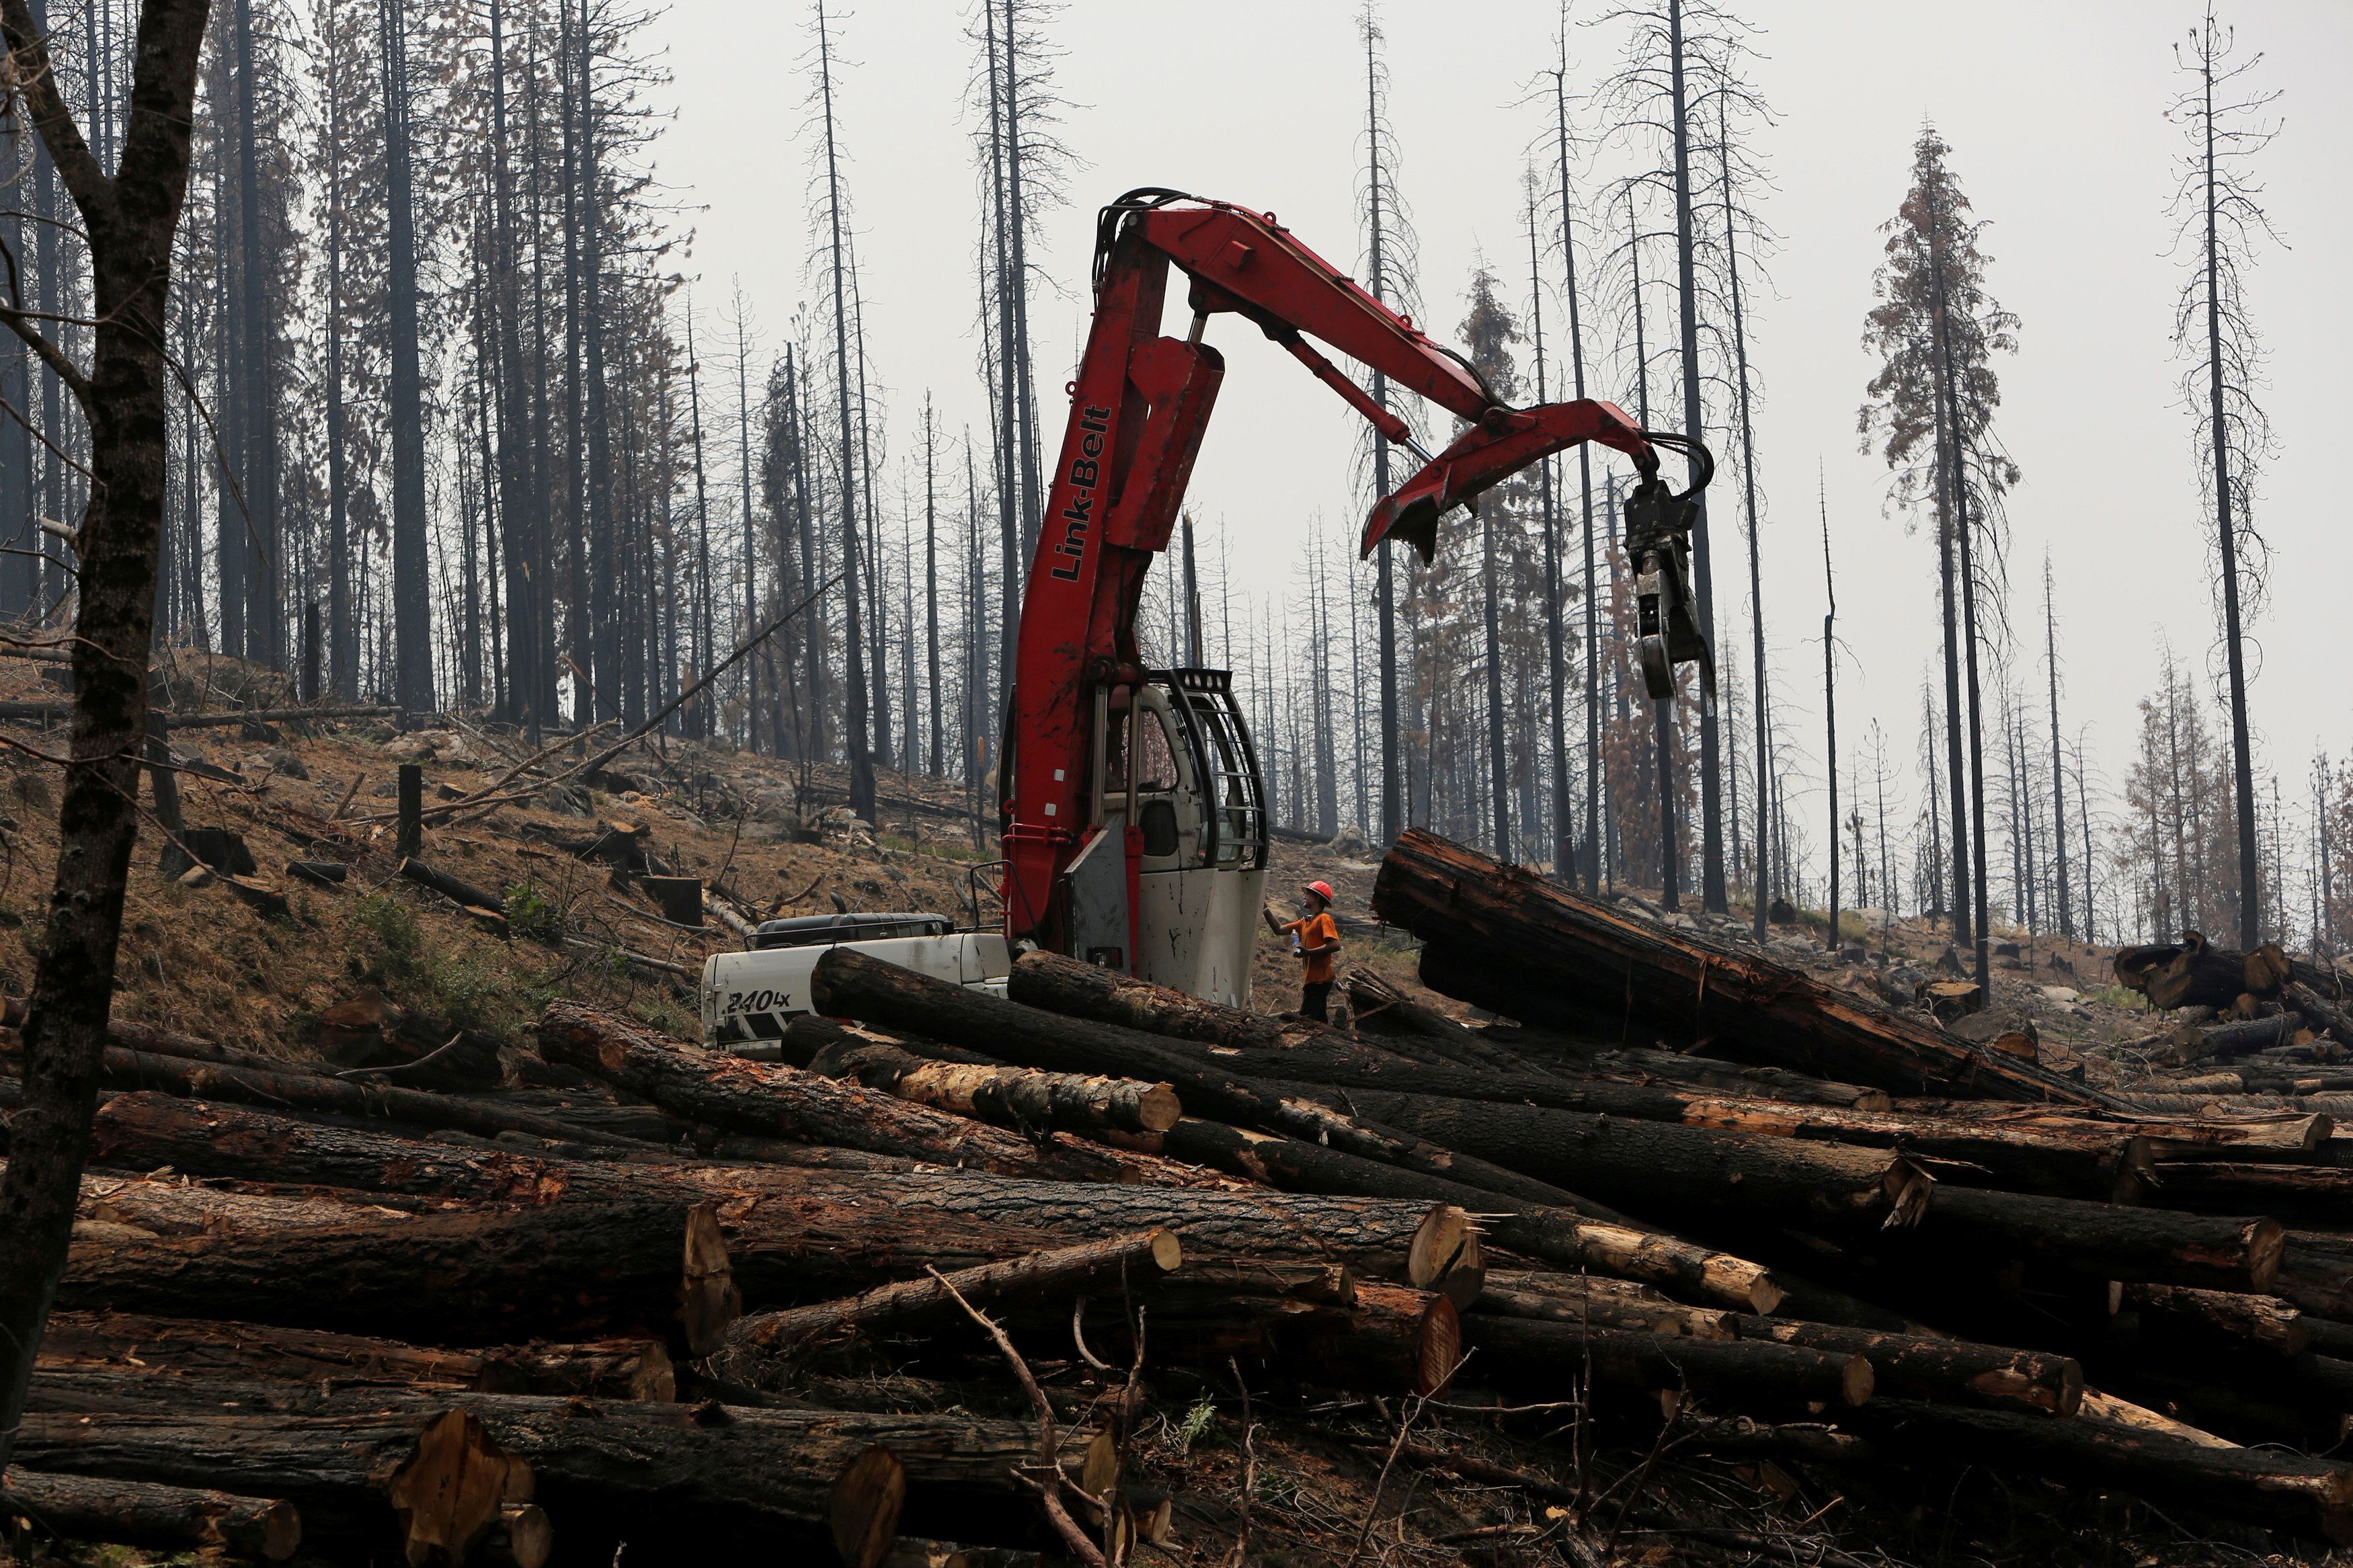 An active logging site is pictured among burned trees from the Rim  fire near Groveland, California July 30, 2014. REUTERS/Robert Galbraith/File Photo